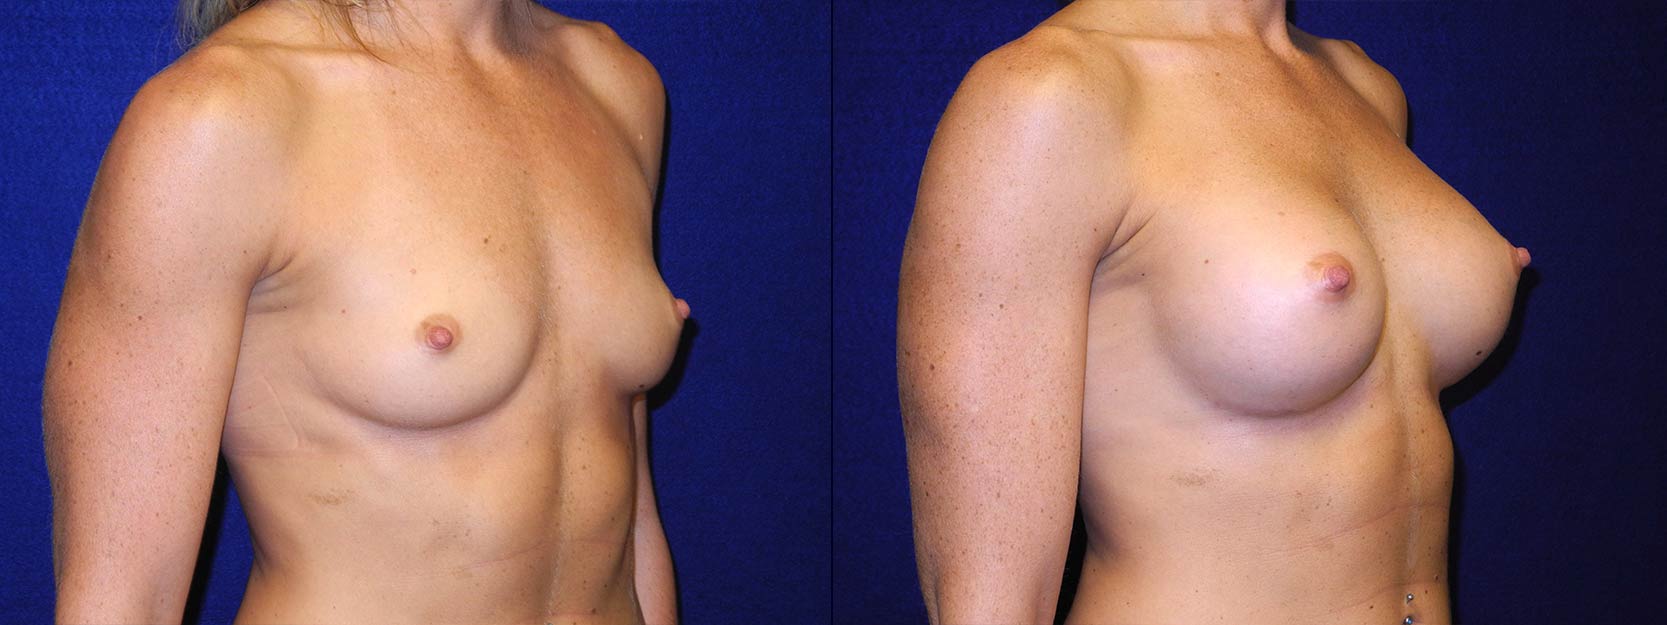 Right 3/4 View - Breast Augmentation - Silicone Implants